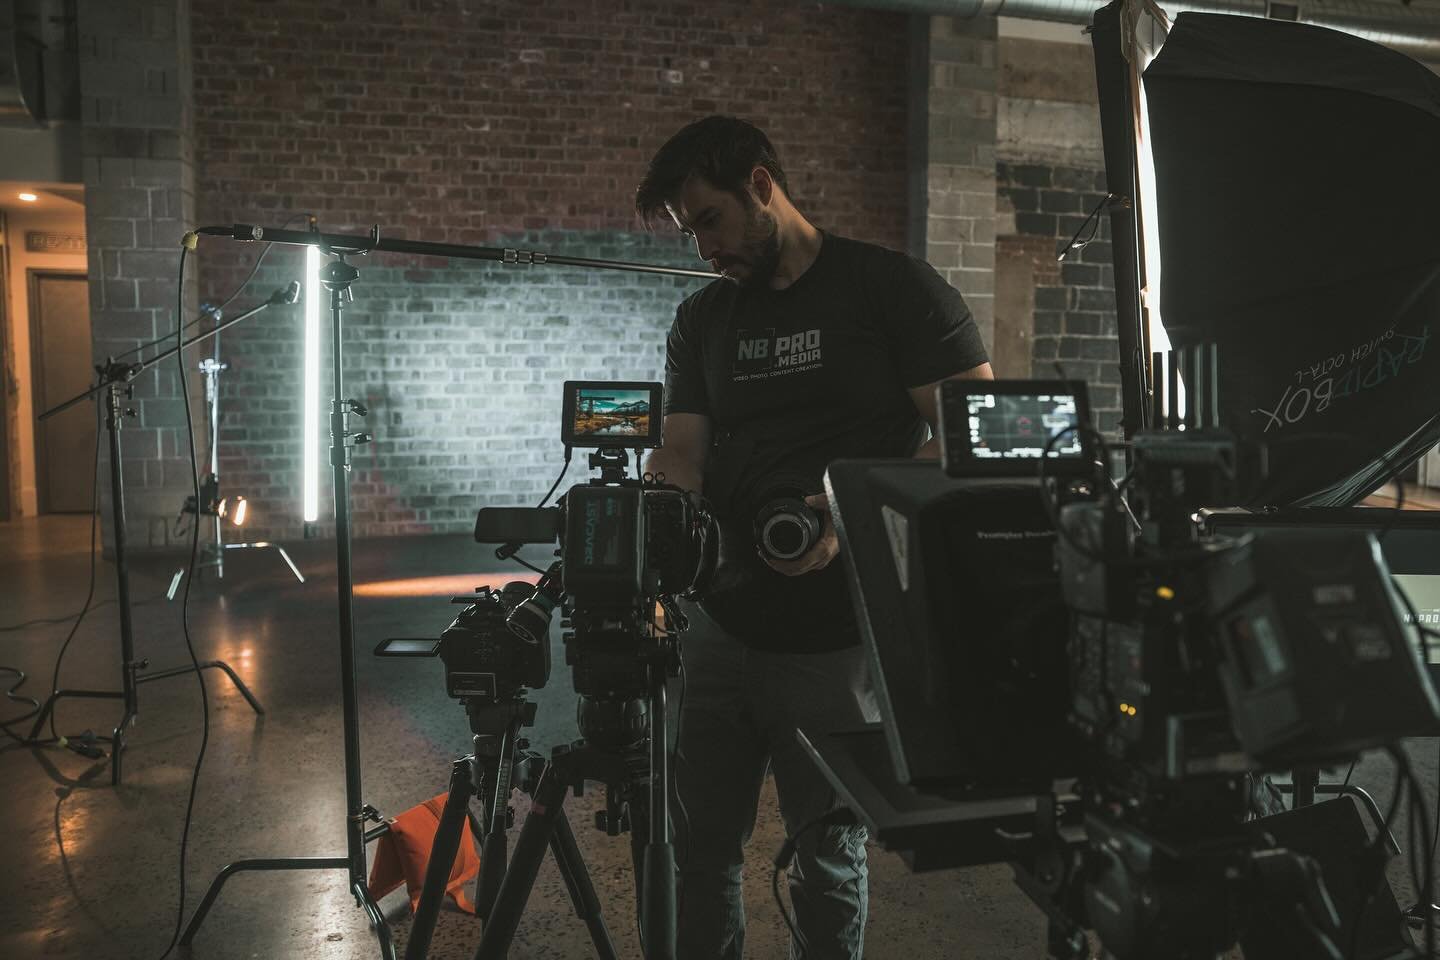 Saturday we were lucky enough to shoot in a beautiful studio space. Thank you @18labelstudios for having us and having a really nice brick wall to use as a backdrop 🧱 🎥 
&bull;
&bull;
&bull;
&bull;
#videography #video #filmmaking #videographer #pho